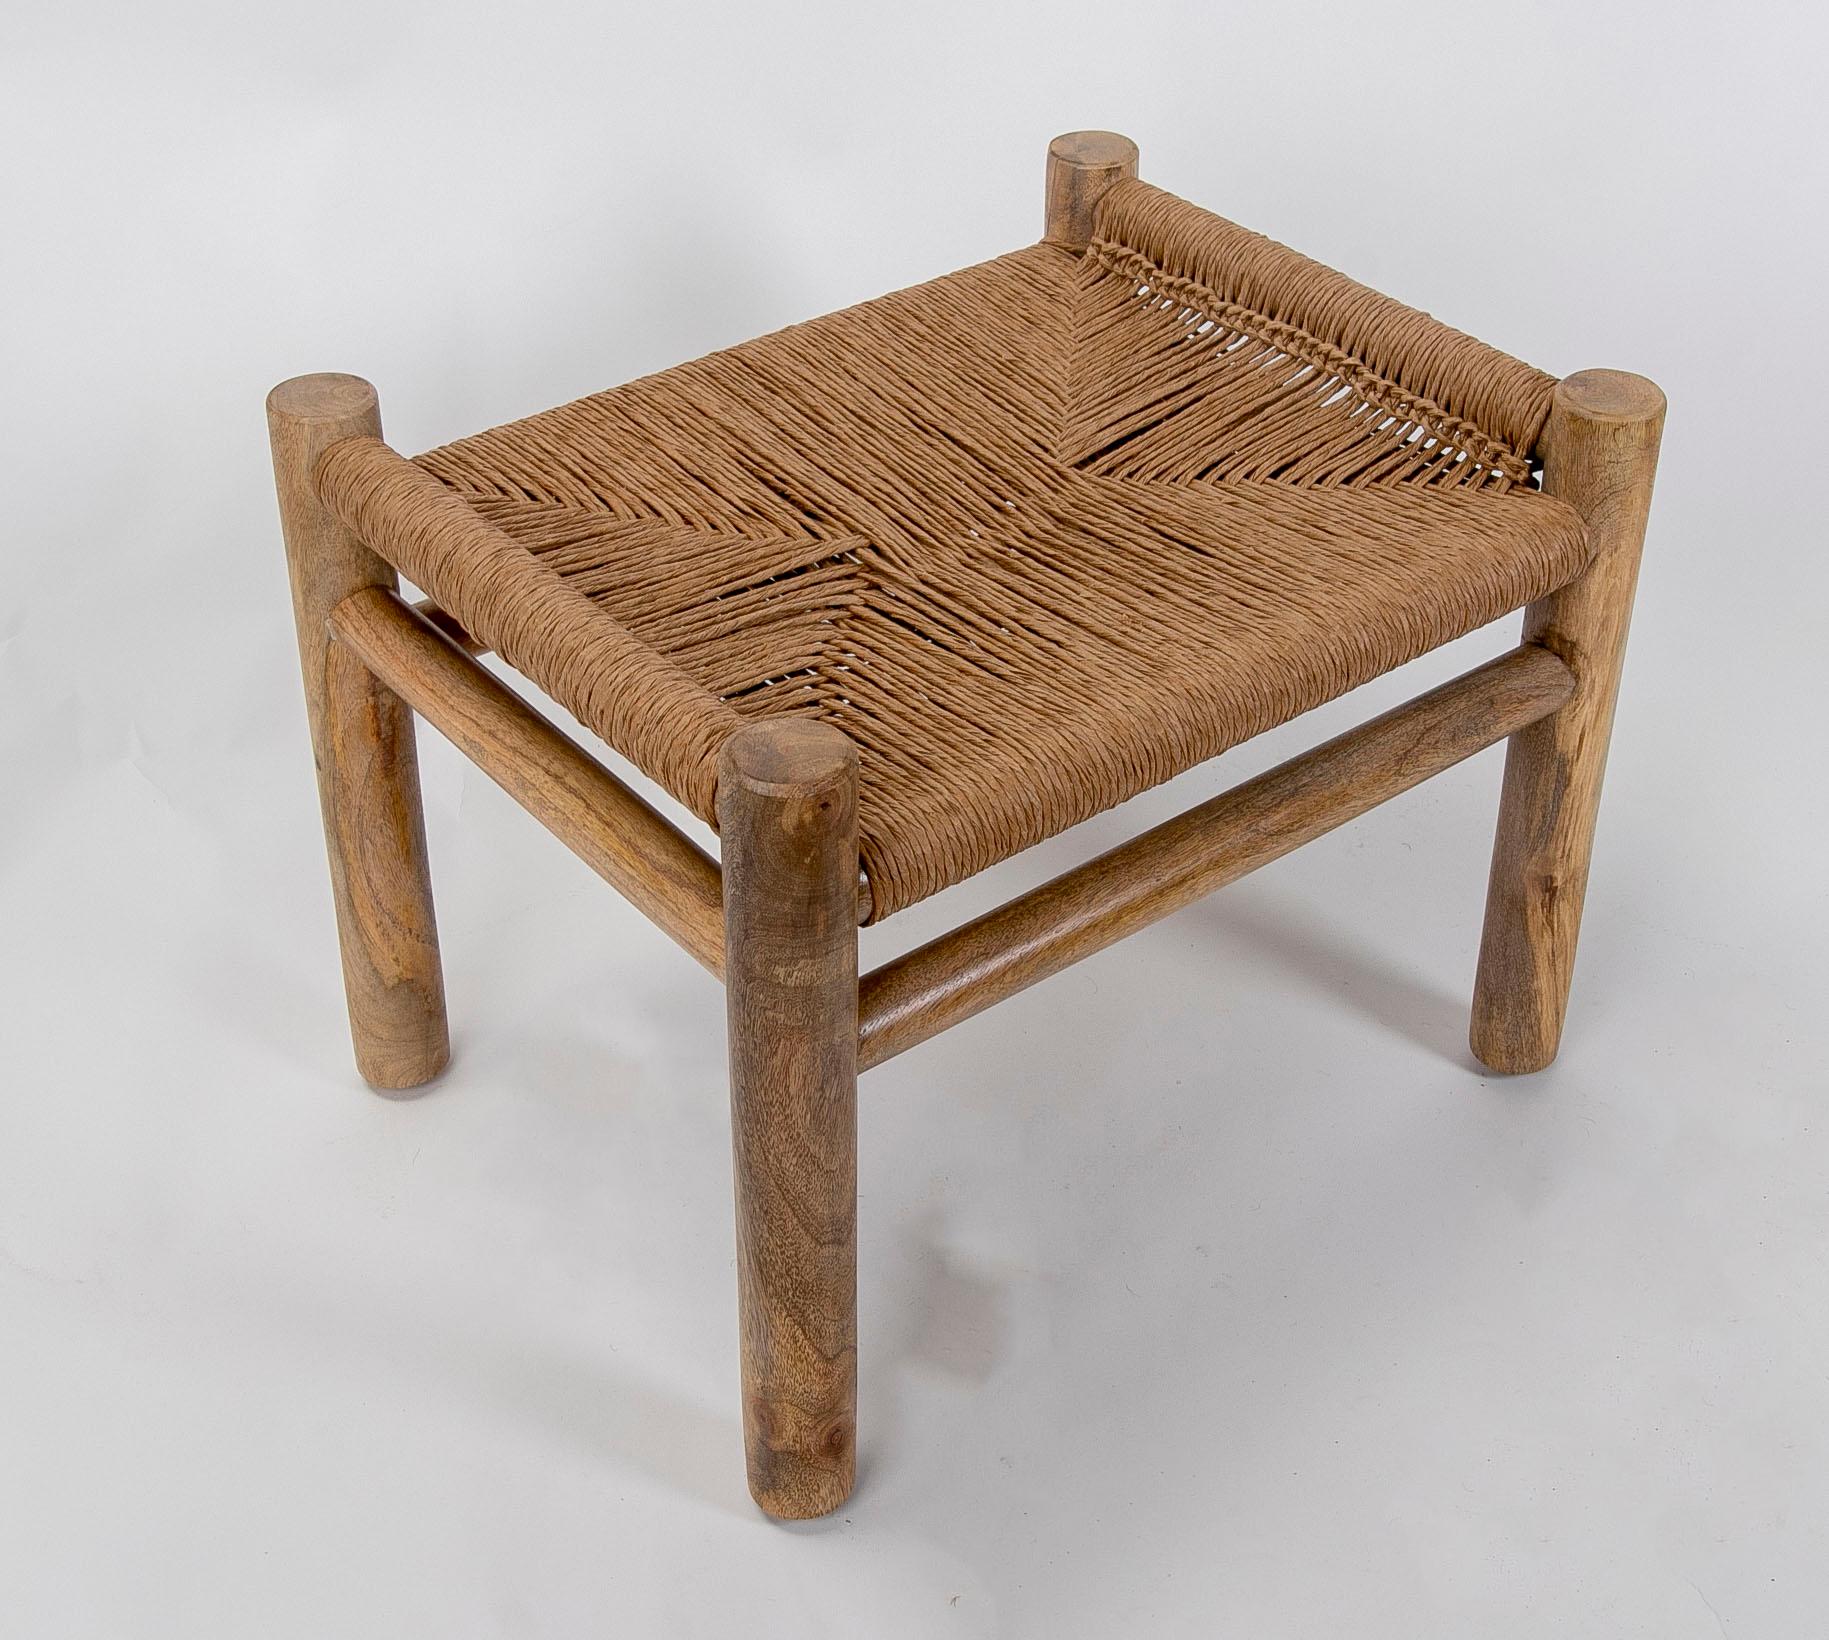 Spanish Wooden Stool with Hand-Braided Rope Seat For Sale